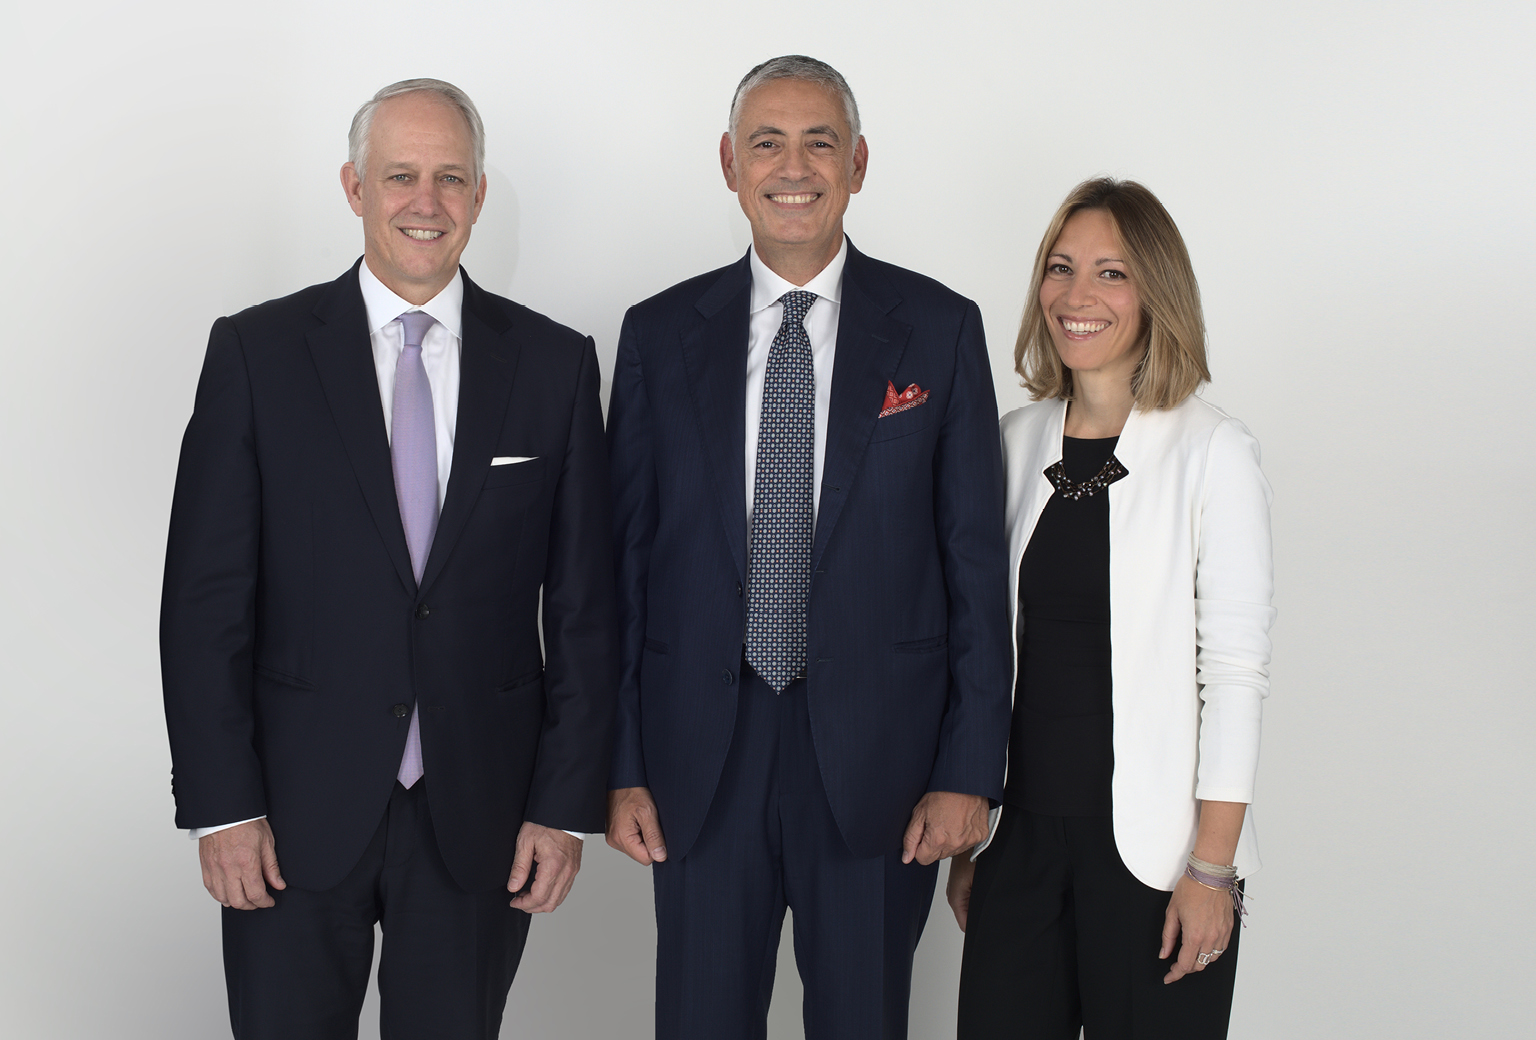 From left to right: Chris McLernon (CEO, Colliers | EMEA), Ofer Arbib (Co-principal of Colliers Italy and CEO of Colliers Global Investors Italy), Giulia Longo (Co-principal of Colliers Italy)